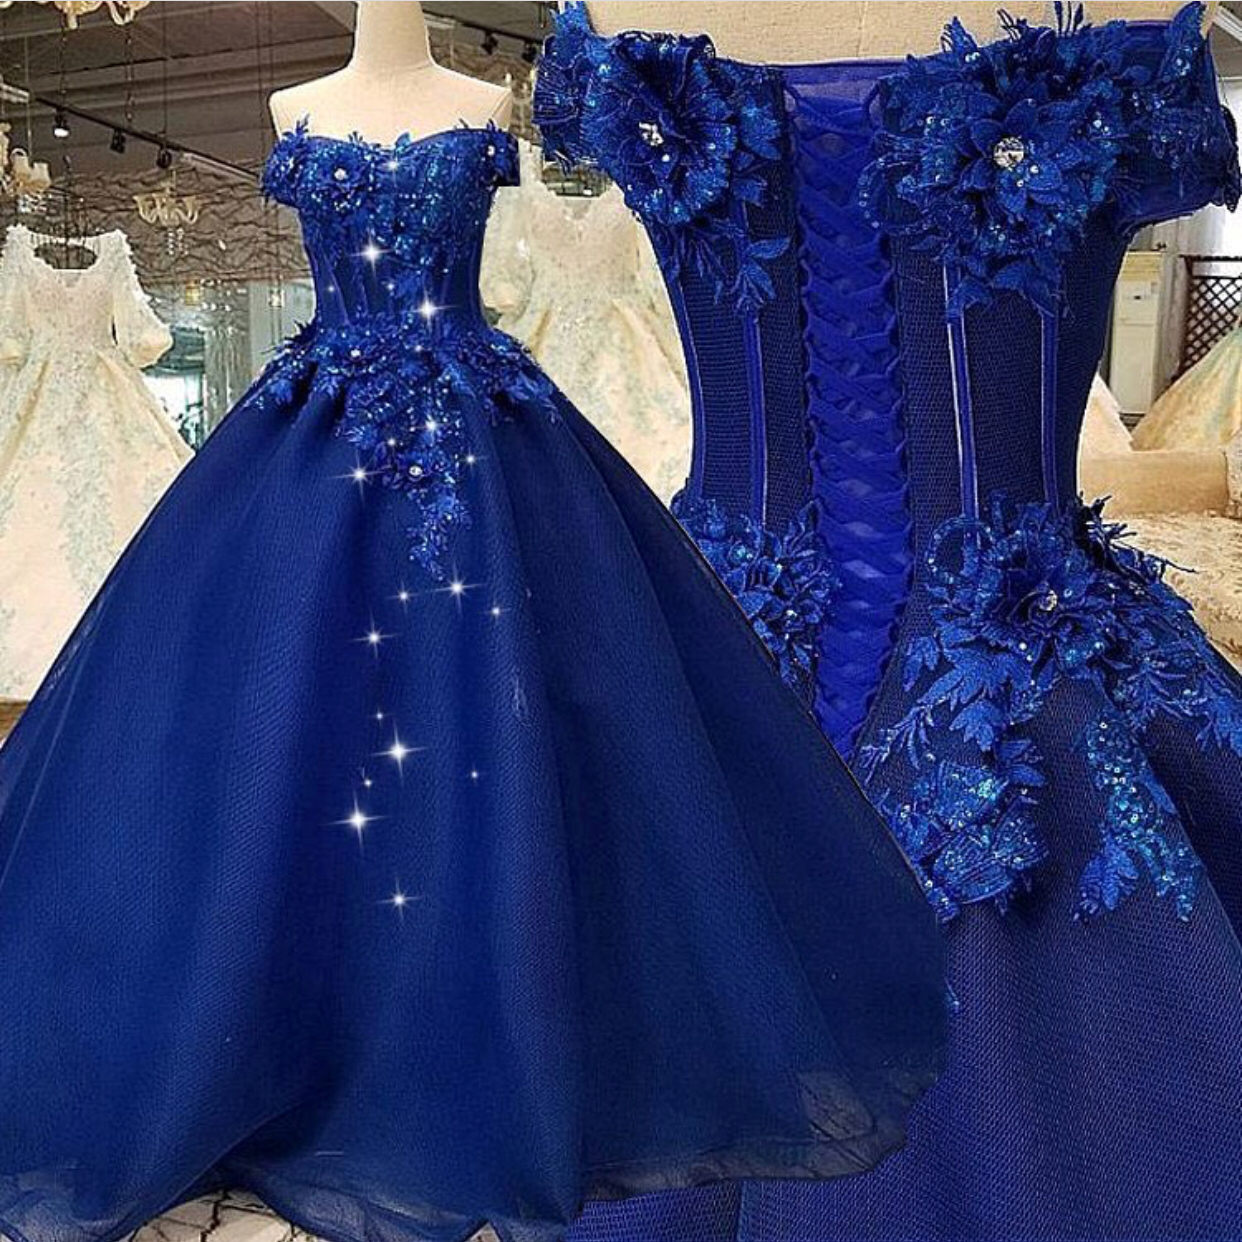 Off The Shoulder Prom Dress Ball Gown Prom Dress Royal Blue Prom Dress Prom Dresses 2022 